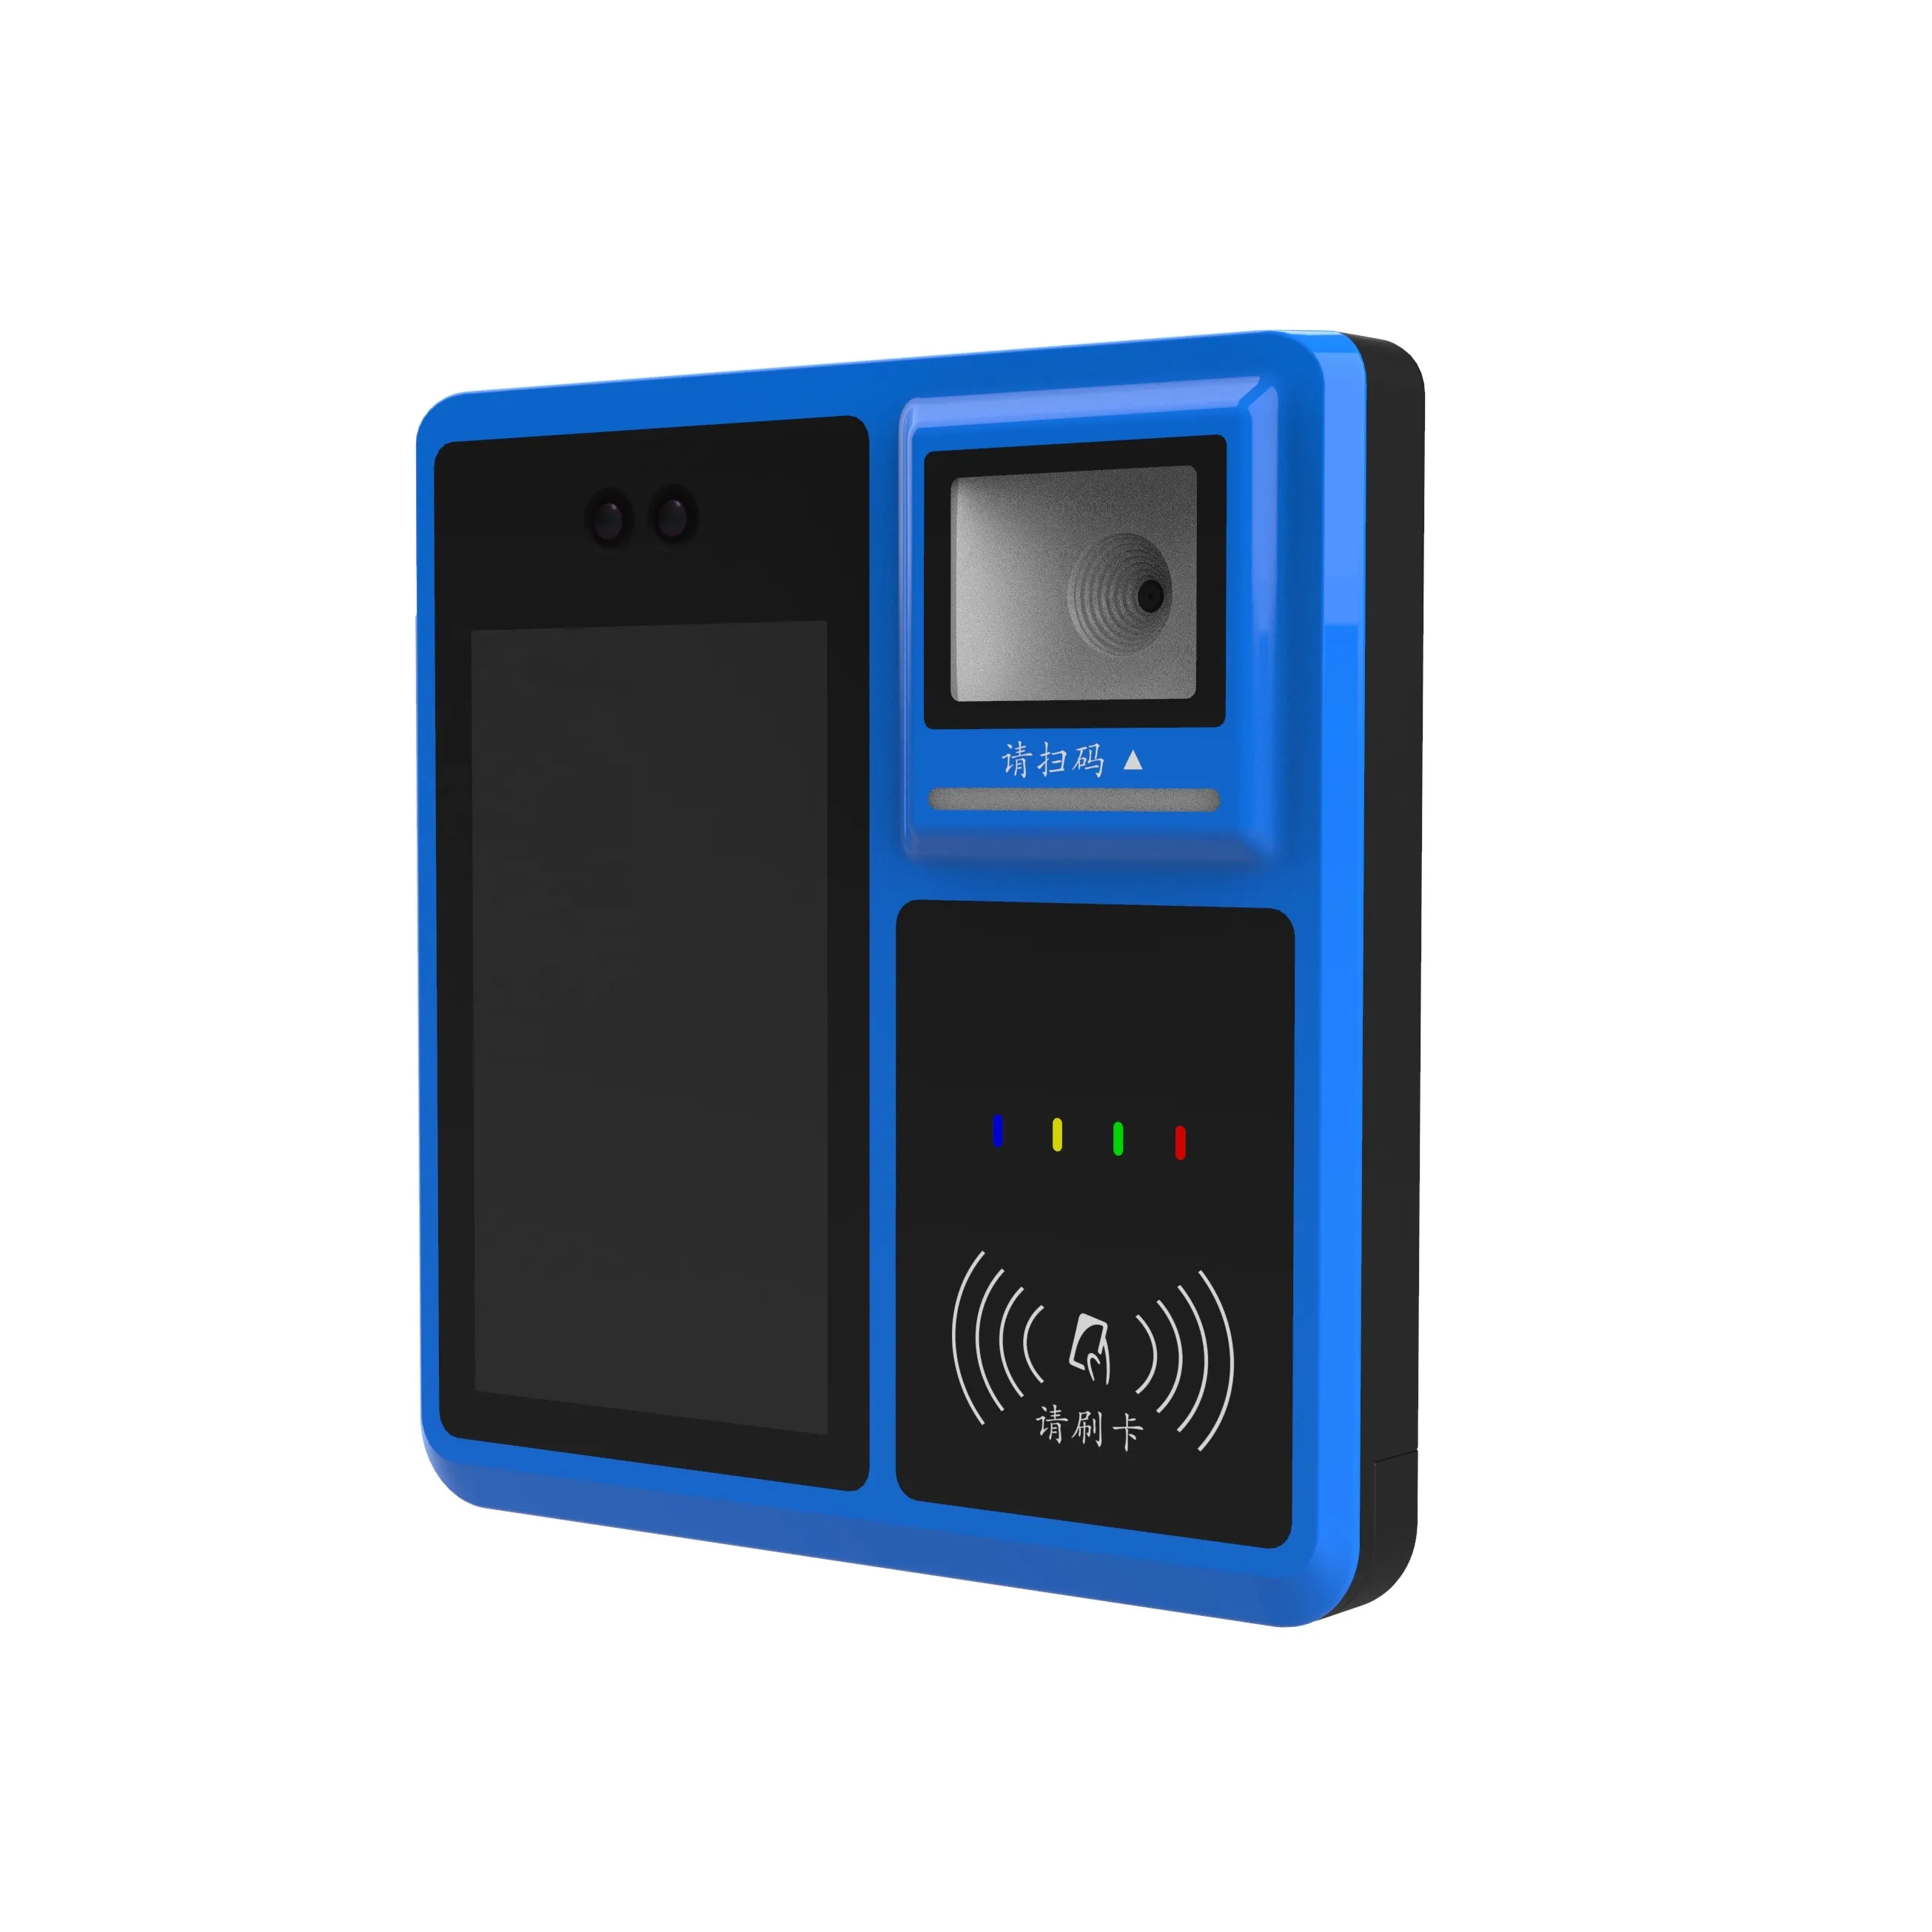 Decard tap-and-go Android 9.0 P18Q -X1 qr code automated fare collection bus validator payment devices POS system